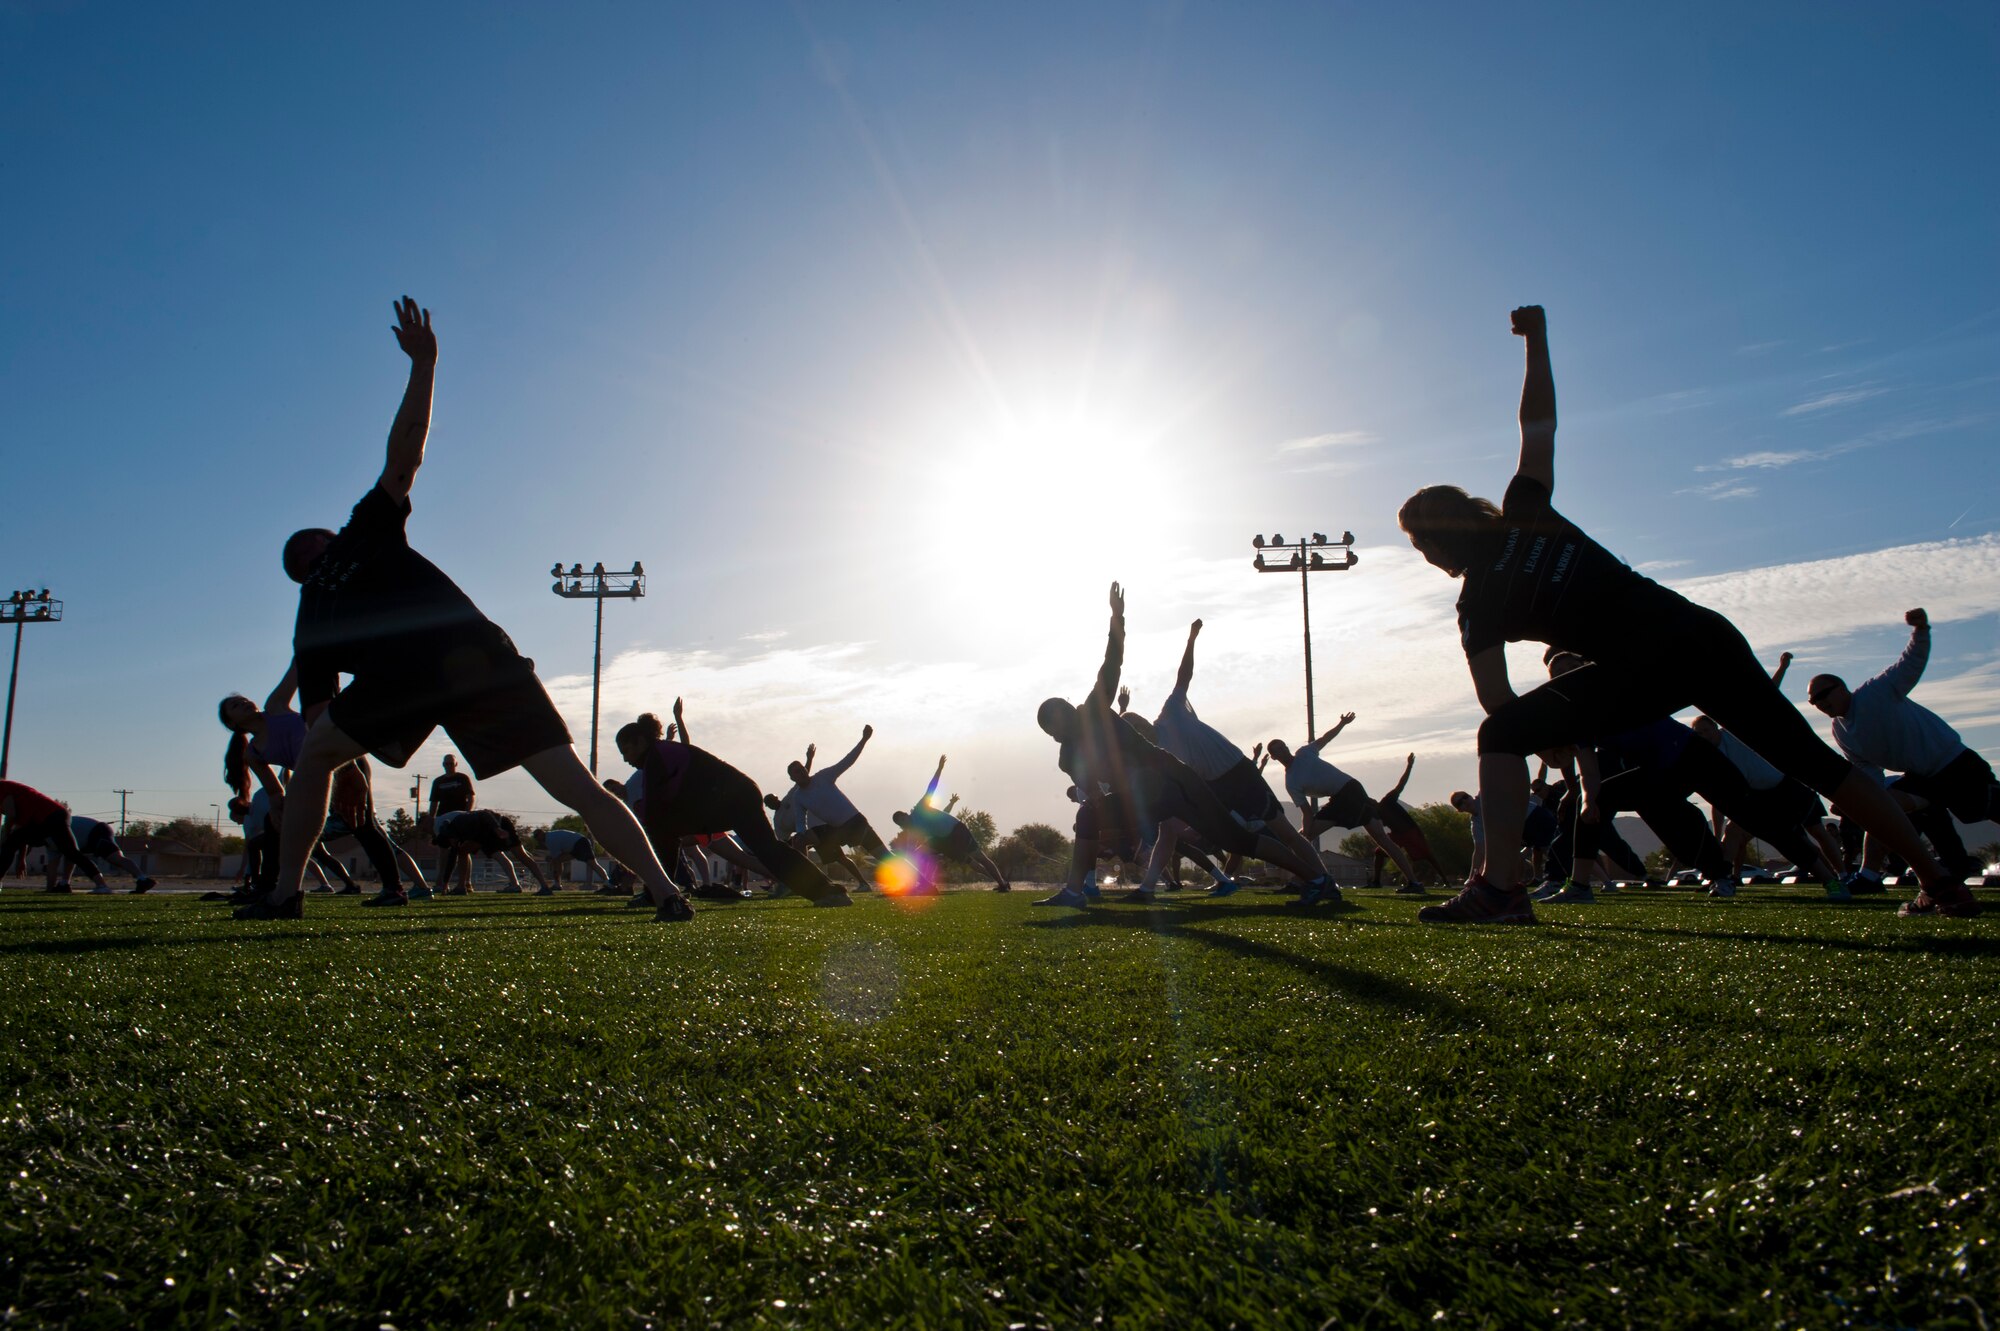 Participants warm-up before the Warrior Trained Fitness exercise session at the Warrior Fitness Center April 24, 2014, at Nellis Air Force Base, Nev. WTF is a high intensity interval training workout designed to build up cardio-vascular and muscular strength. (U.S. Air Force photo by Airman 1st Class Thomas Spangler)